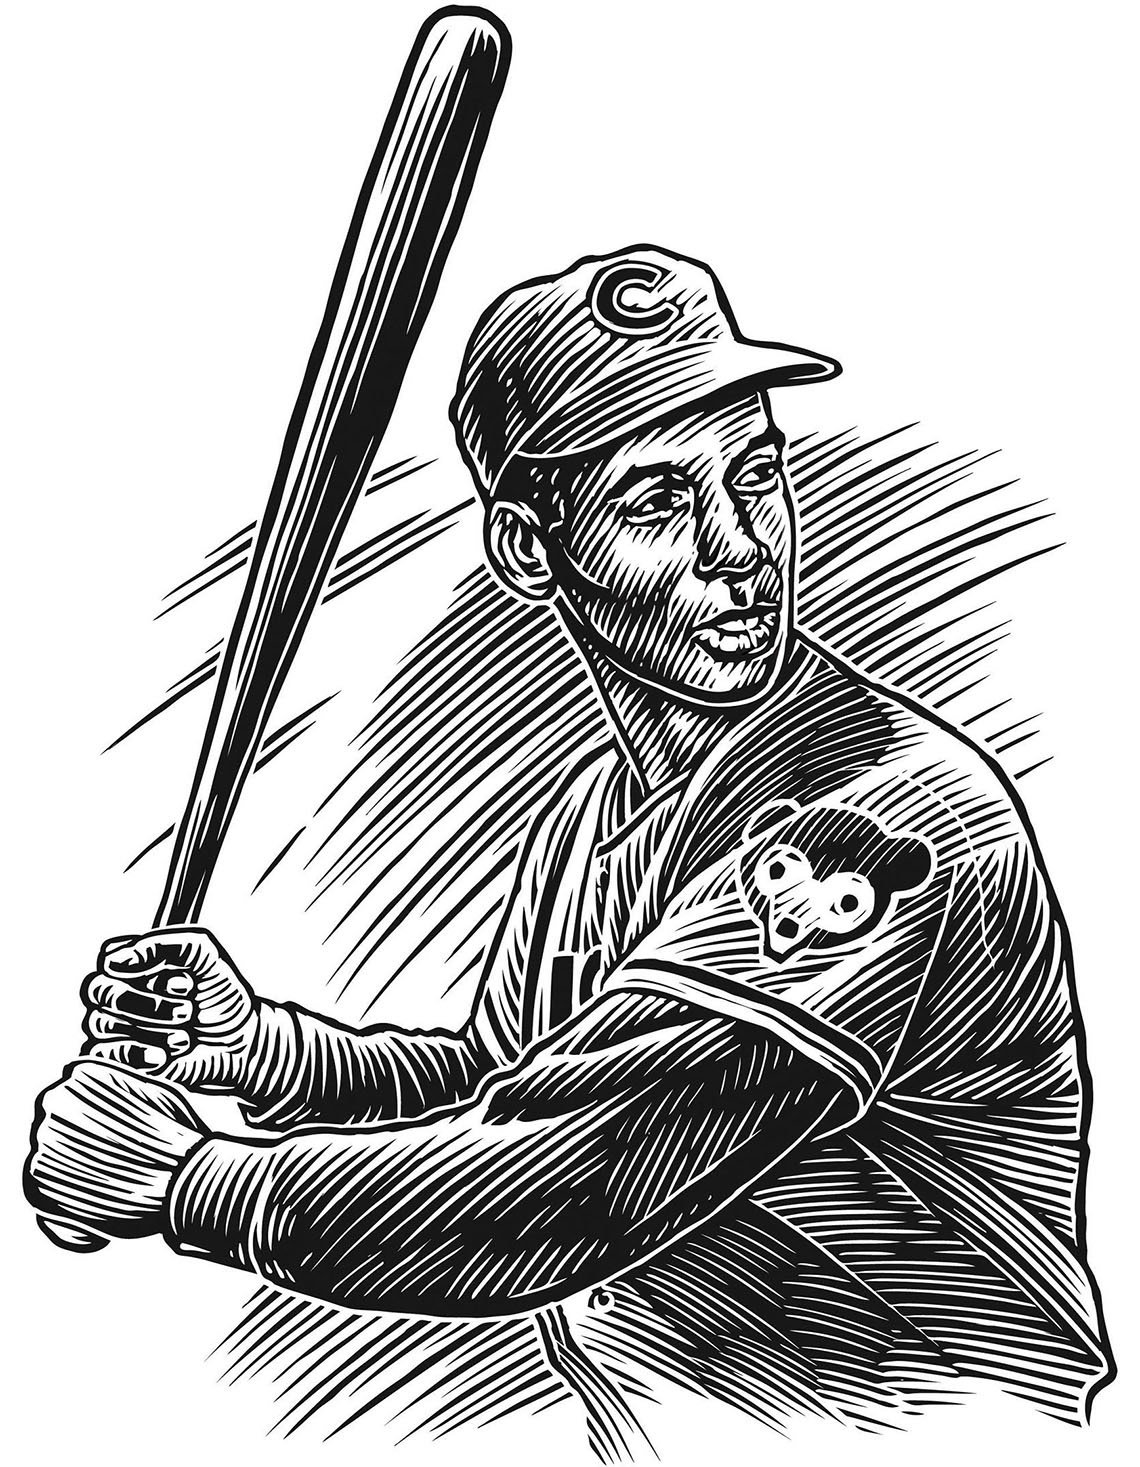 scratchboard illustration of a sports player